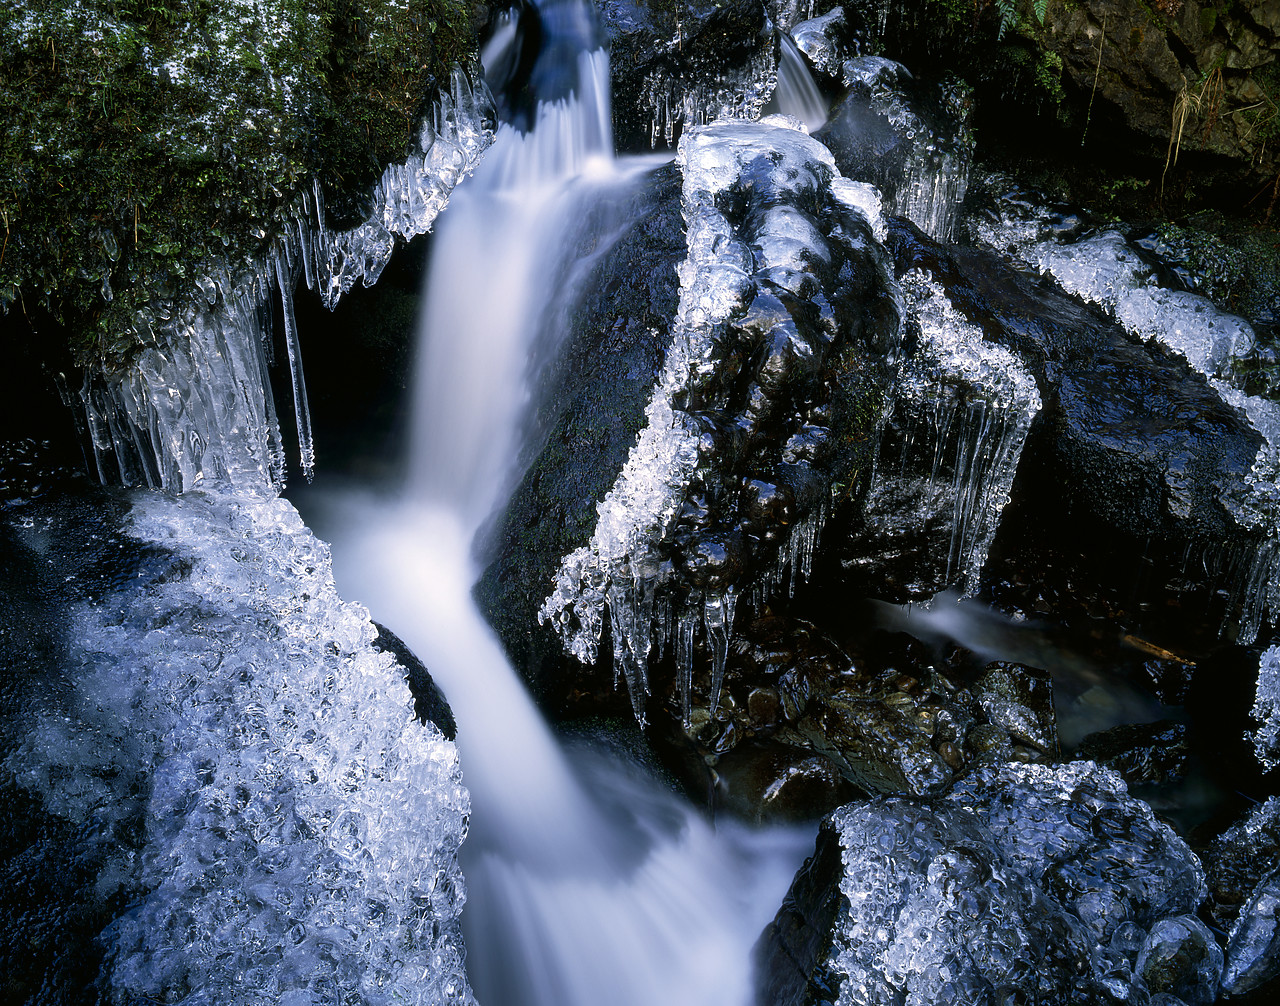 #030016-2 - Icy Waterfall, Lake District National Park, Cumbria, England